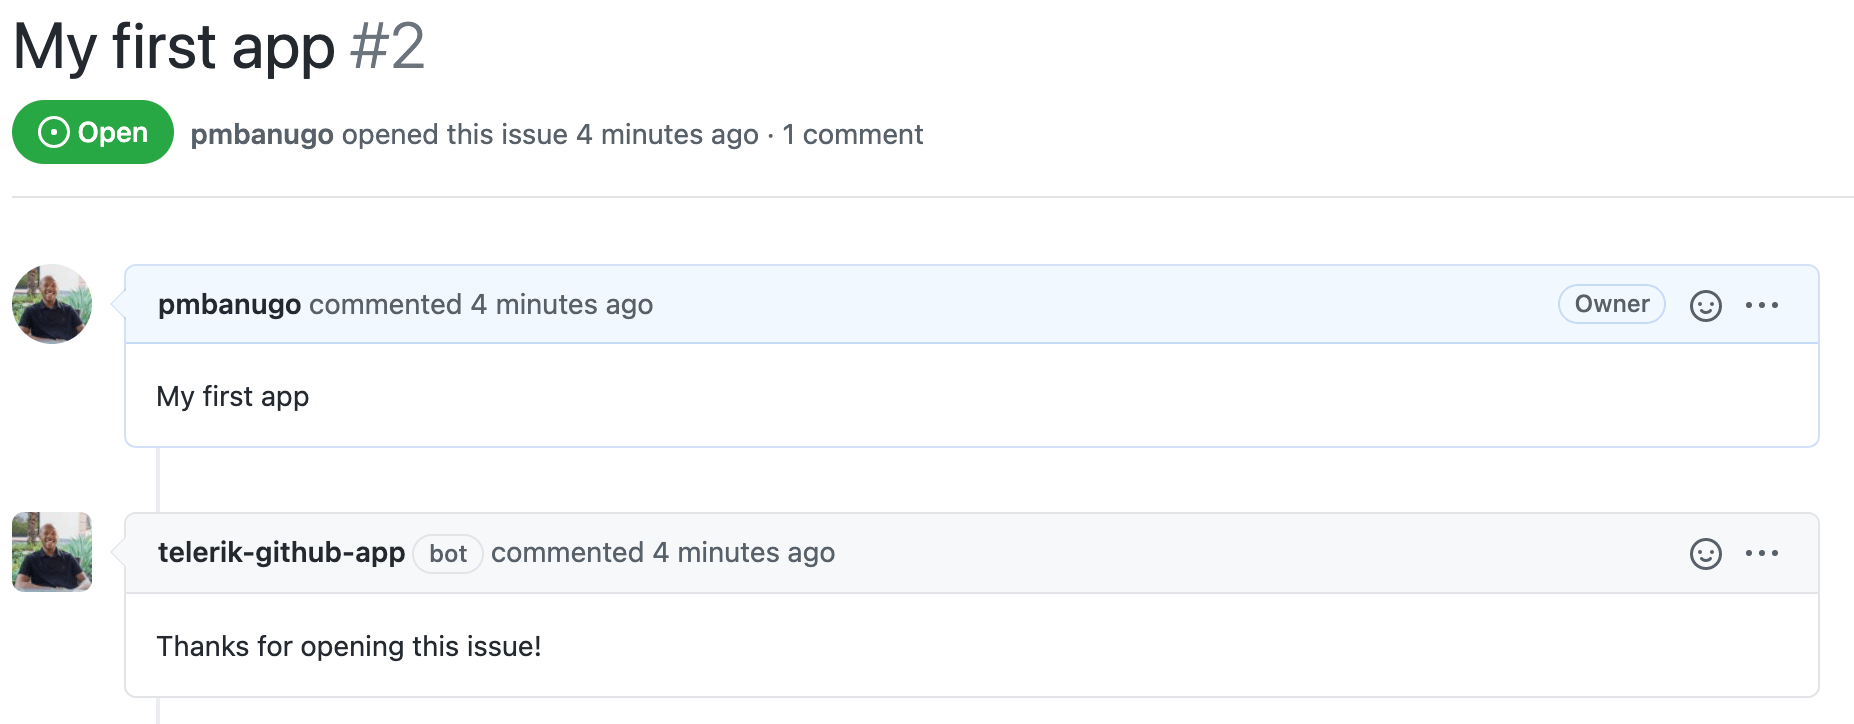 GitHub App new issue: pmbanugo commented “My first app,” and telerik-github-app bot replied, “Thanks for opening this issue?”